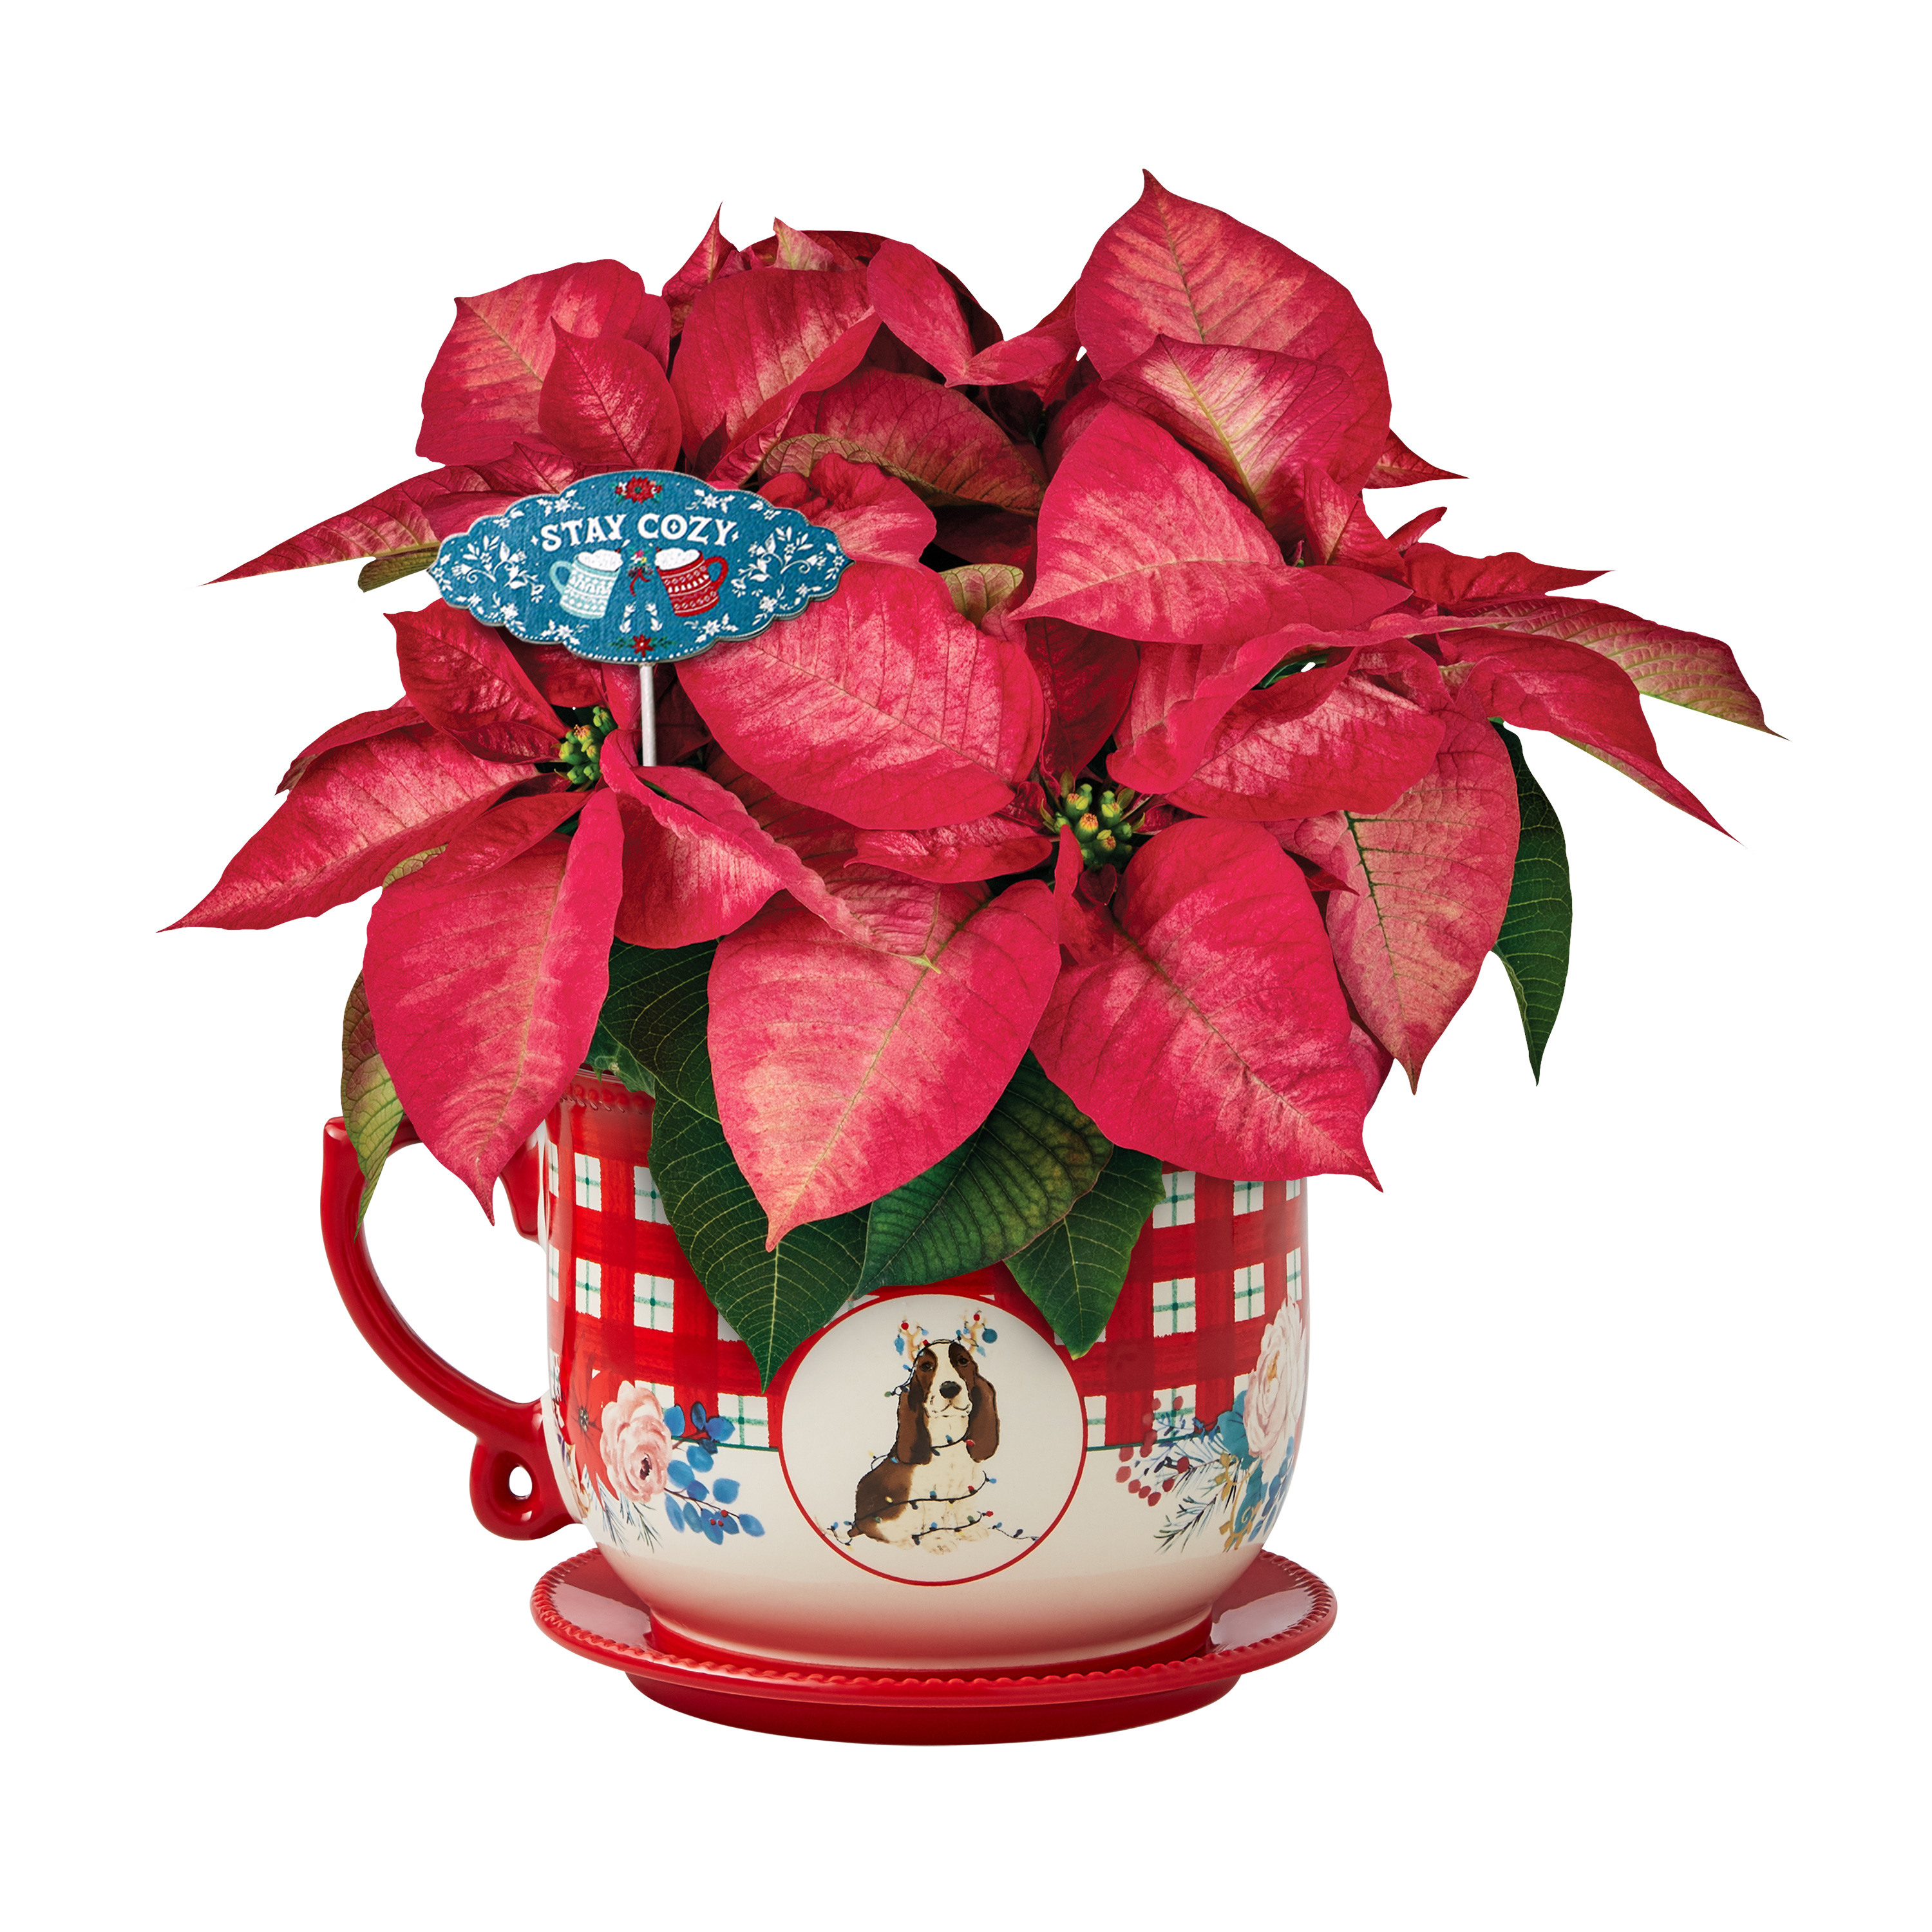 The Pioneer Woman Dark Pink Poinsettia Live Plant in 6" Mug Planter - image 7 of 9